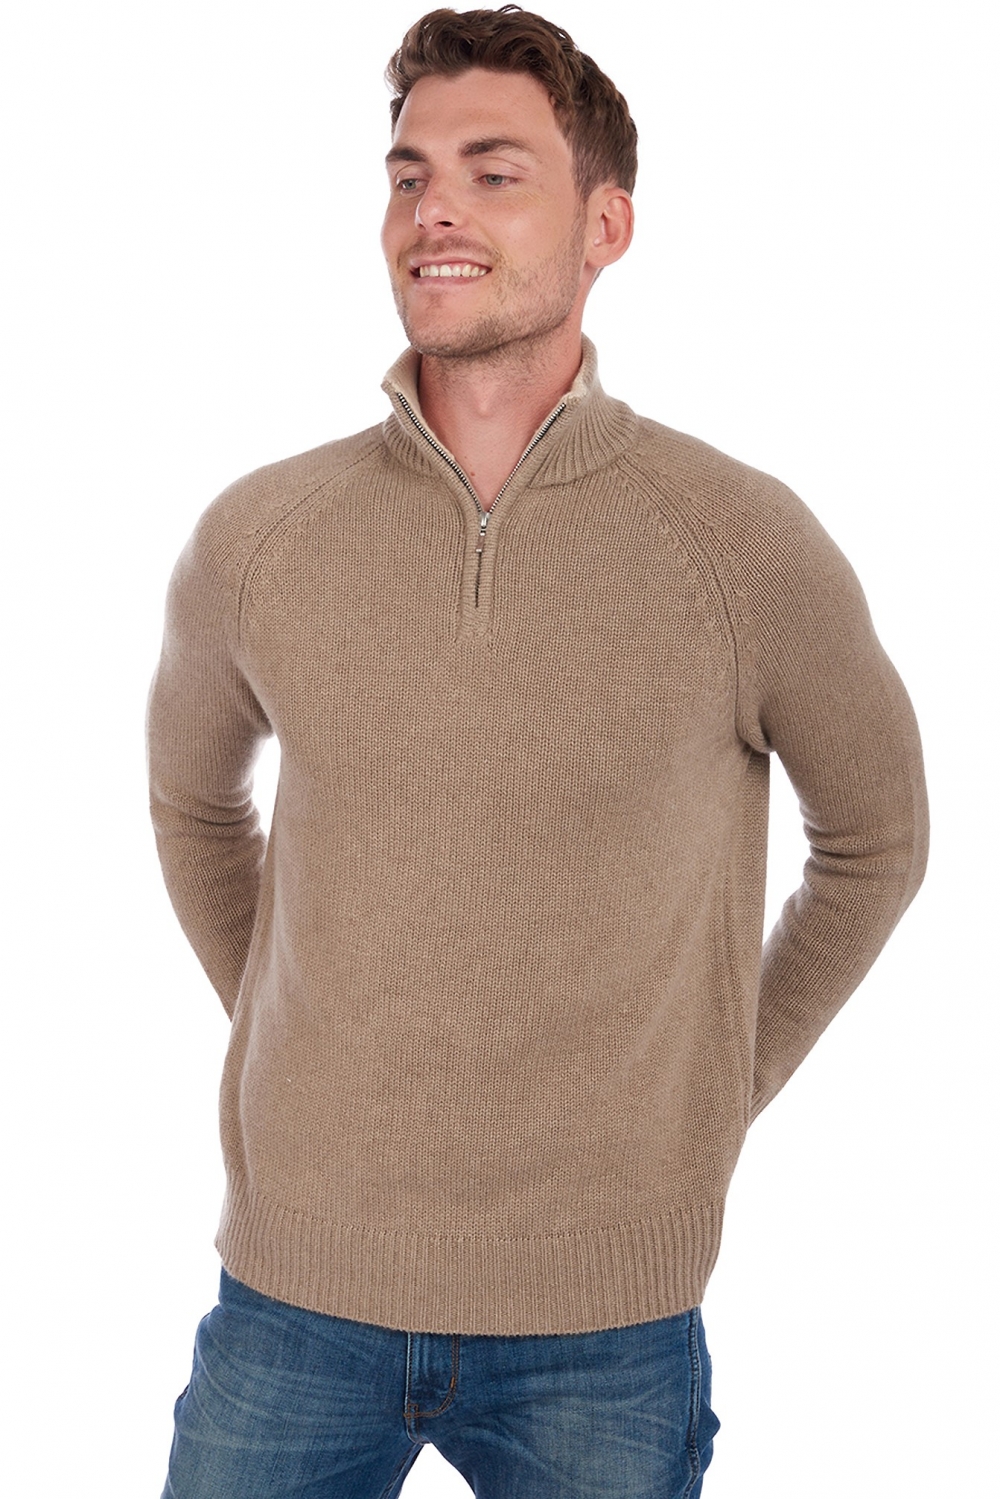 Cachemire pull homme epais angers natural brown natural beige 3xl